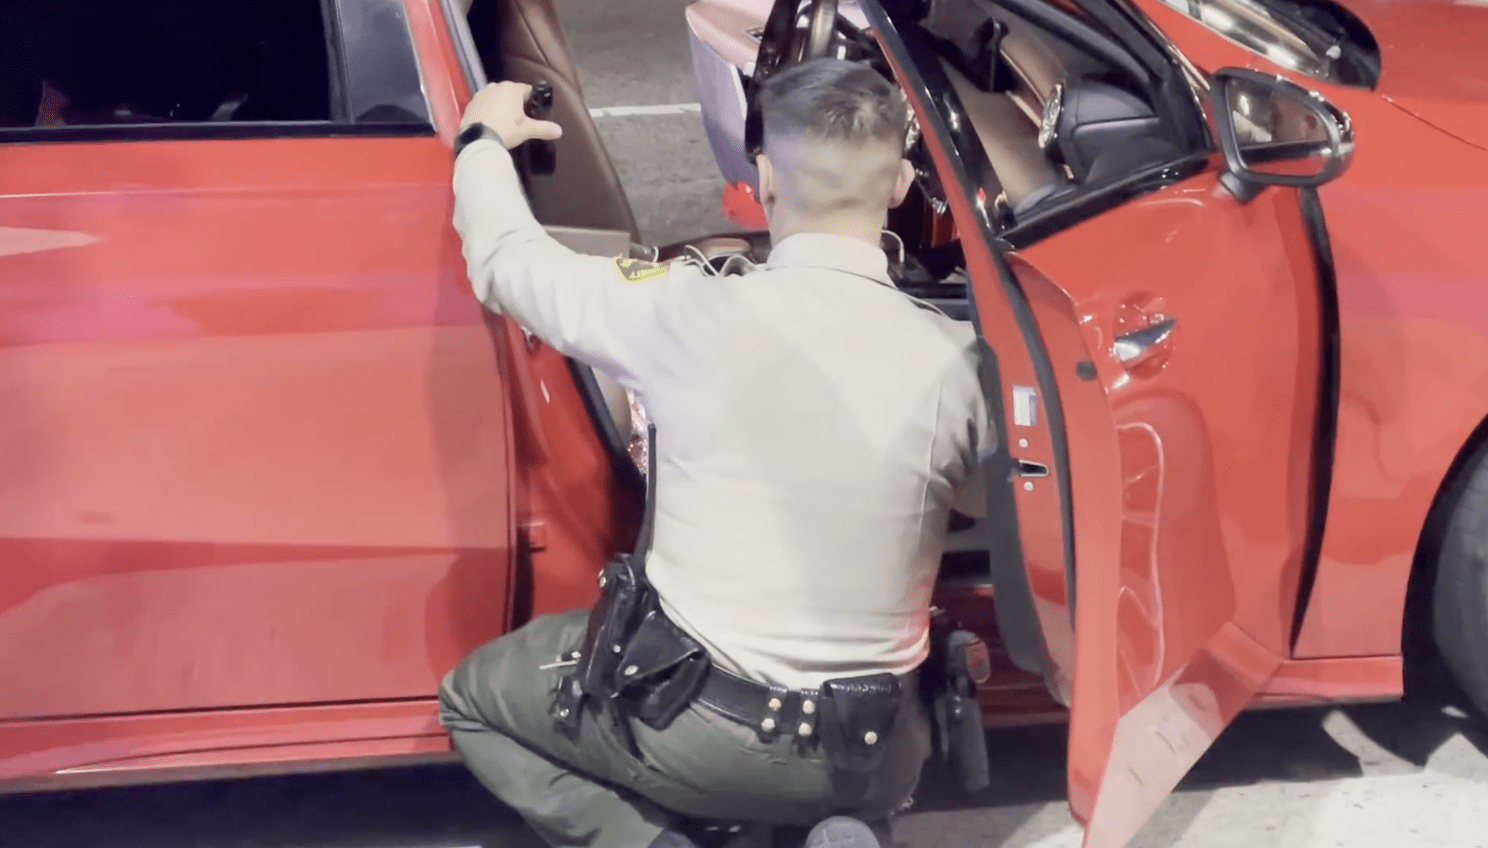 Los Angeles County Sheriffs Department search a motorist's car after pulling him over for an alleged window tint violation. Photo Courtesy of YouTube Channels Tom Zebra and Laura Shark CW